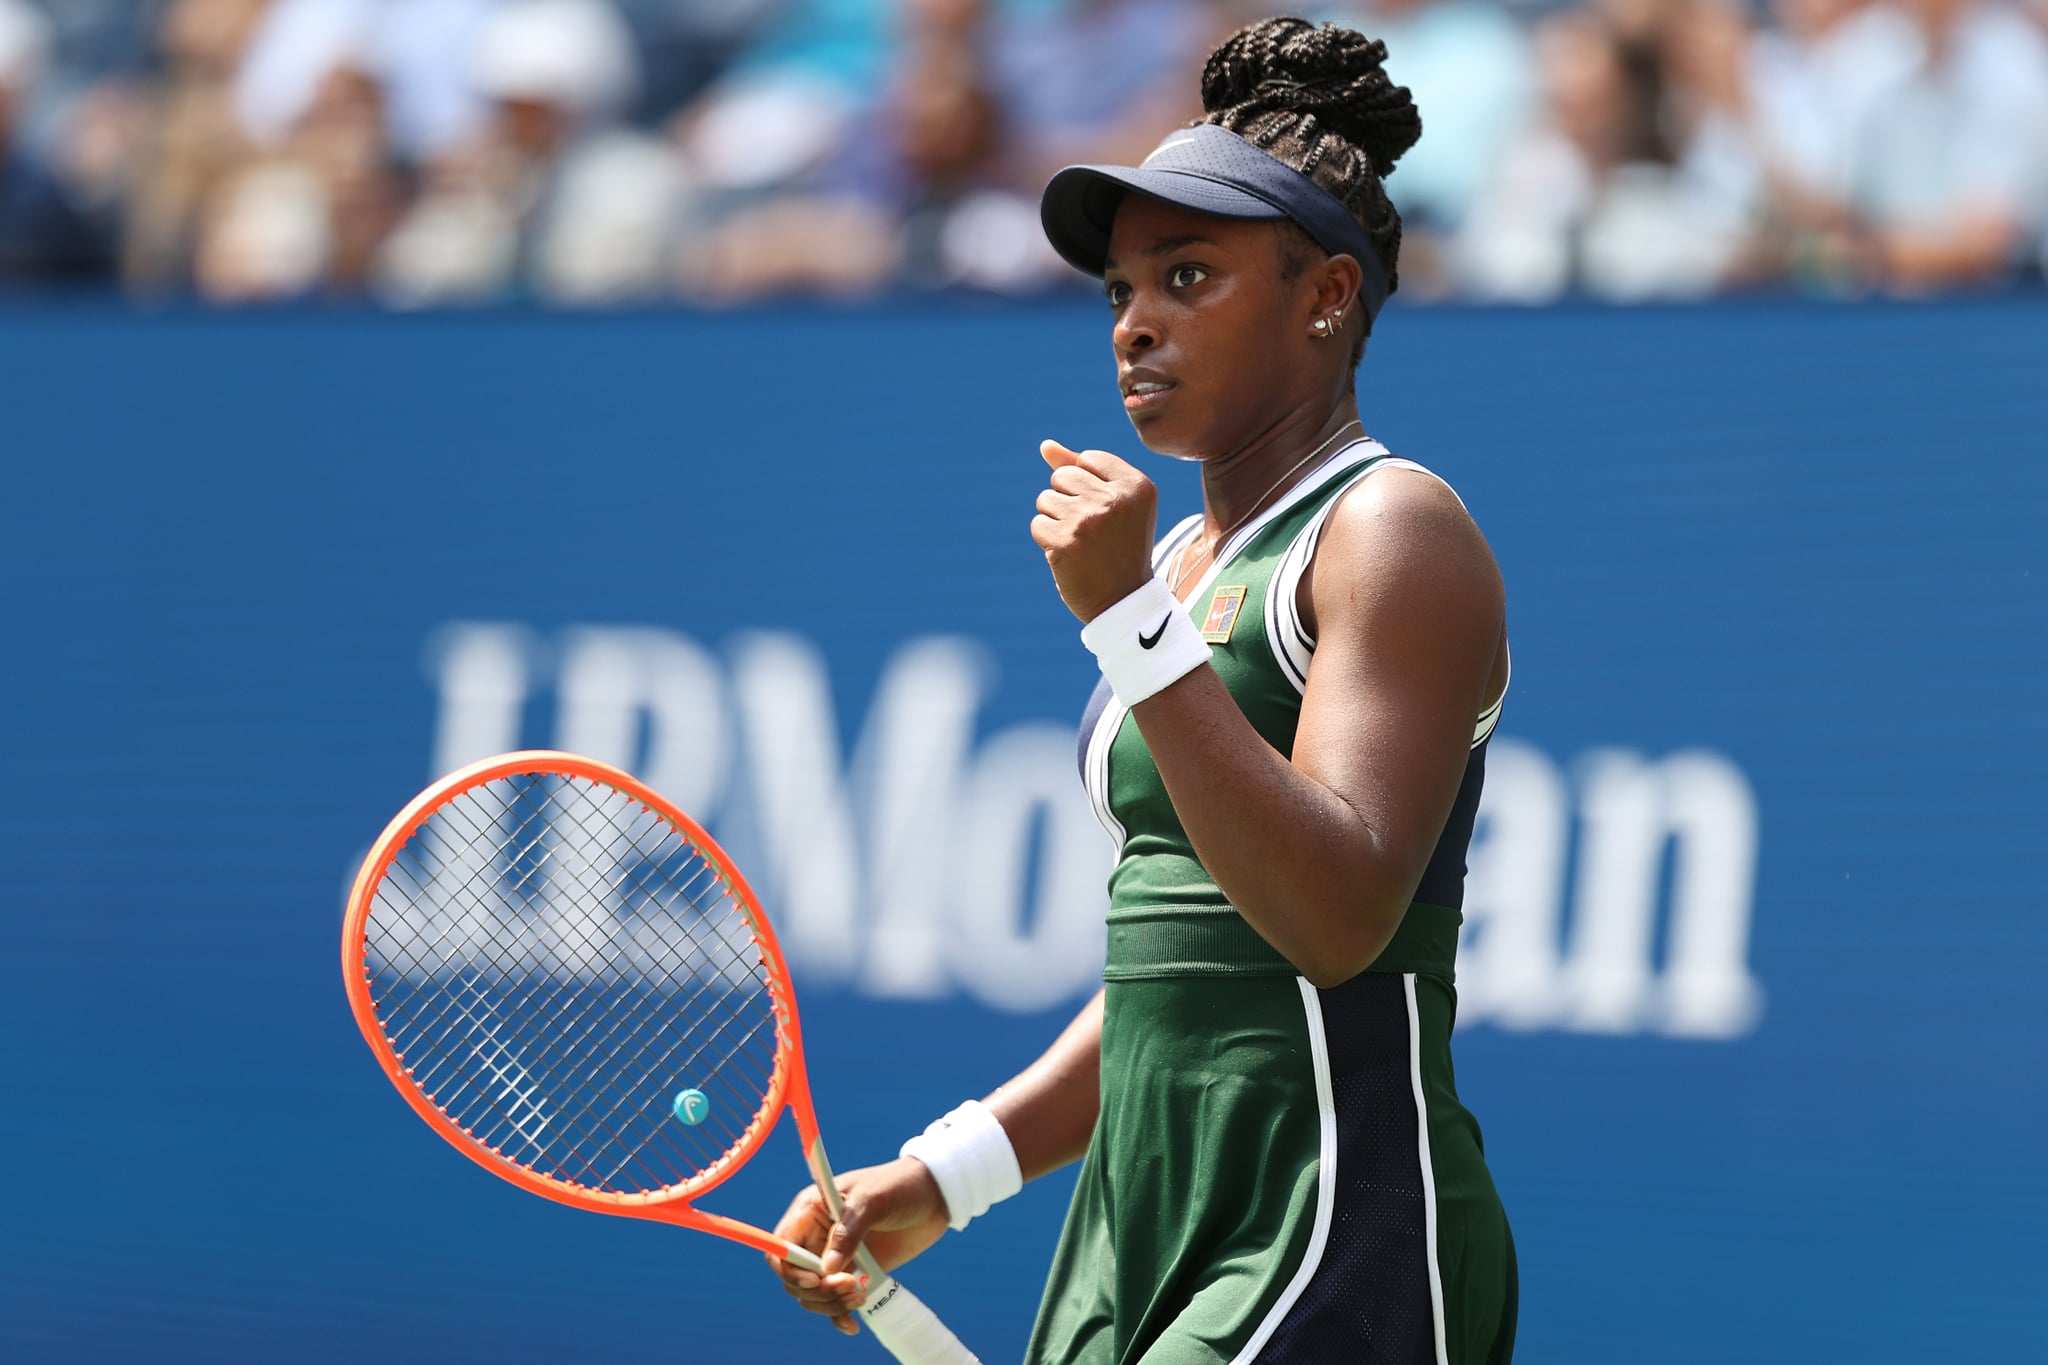 NEW YORK, NEW YORK - AUGUST 30: Sloane Stephens of the United States celebrate after defeating Madison Keys of the United States during their woman's singles first round match on Day One of the 2021 US Open at the Billie Jean King National Tennis Center on August 30, 2021 in the Flushing neighborhood of the Queens borough of New York City. (Photo by Elsa/Getty Images)